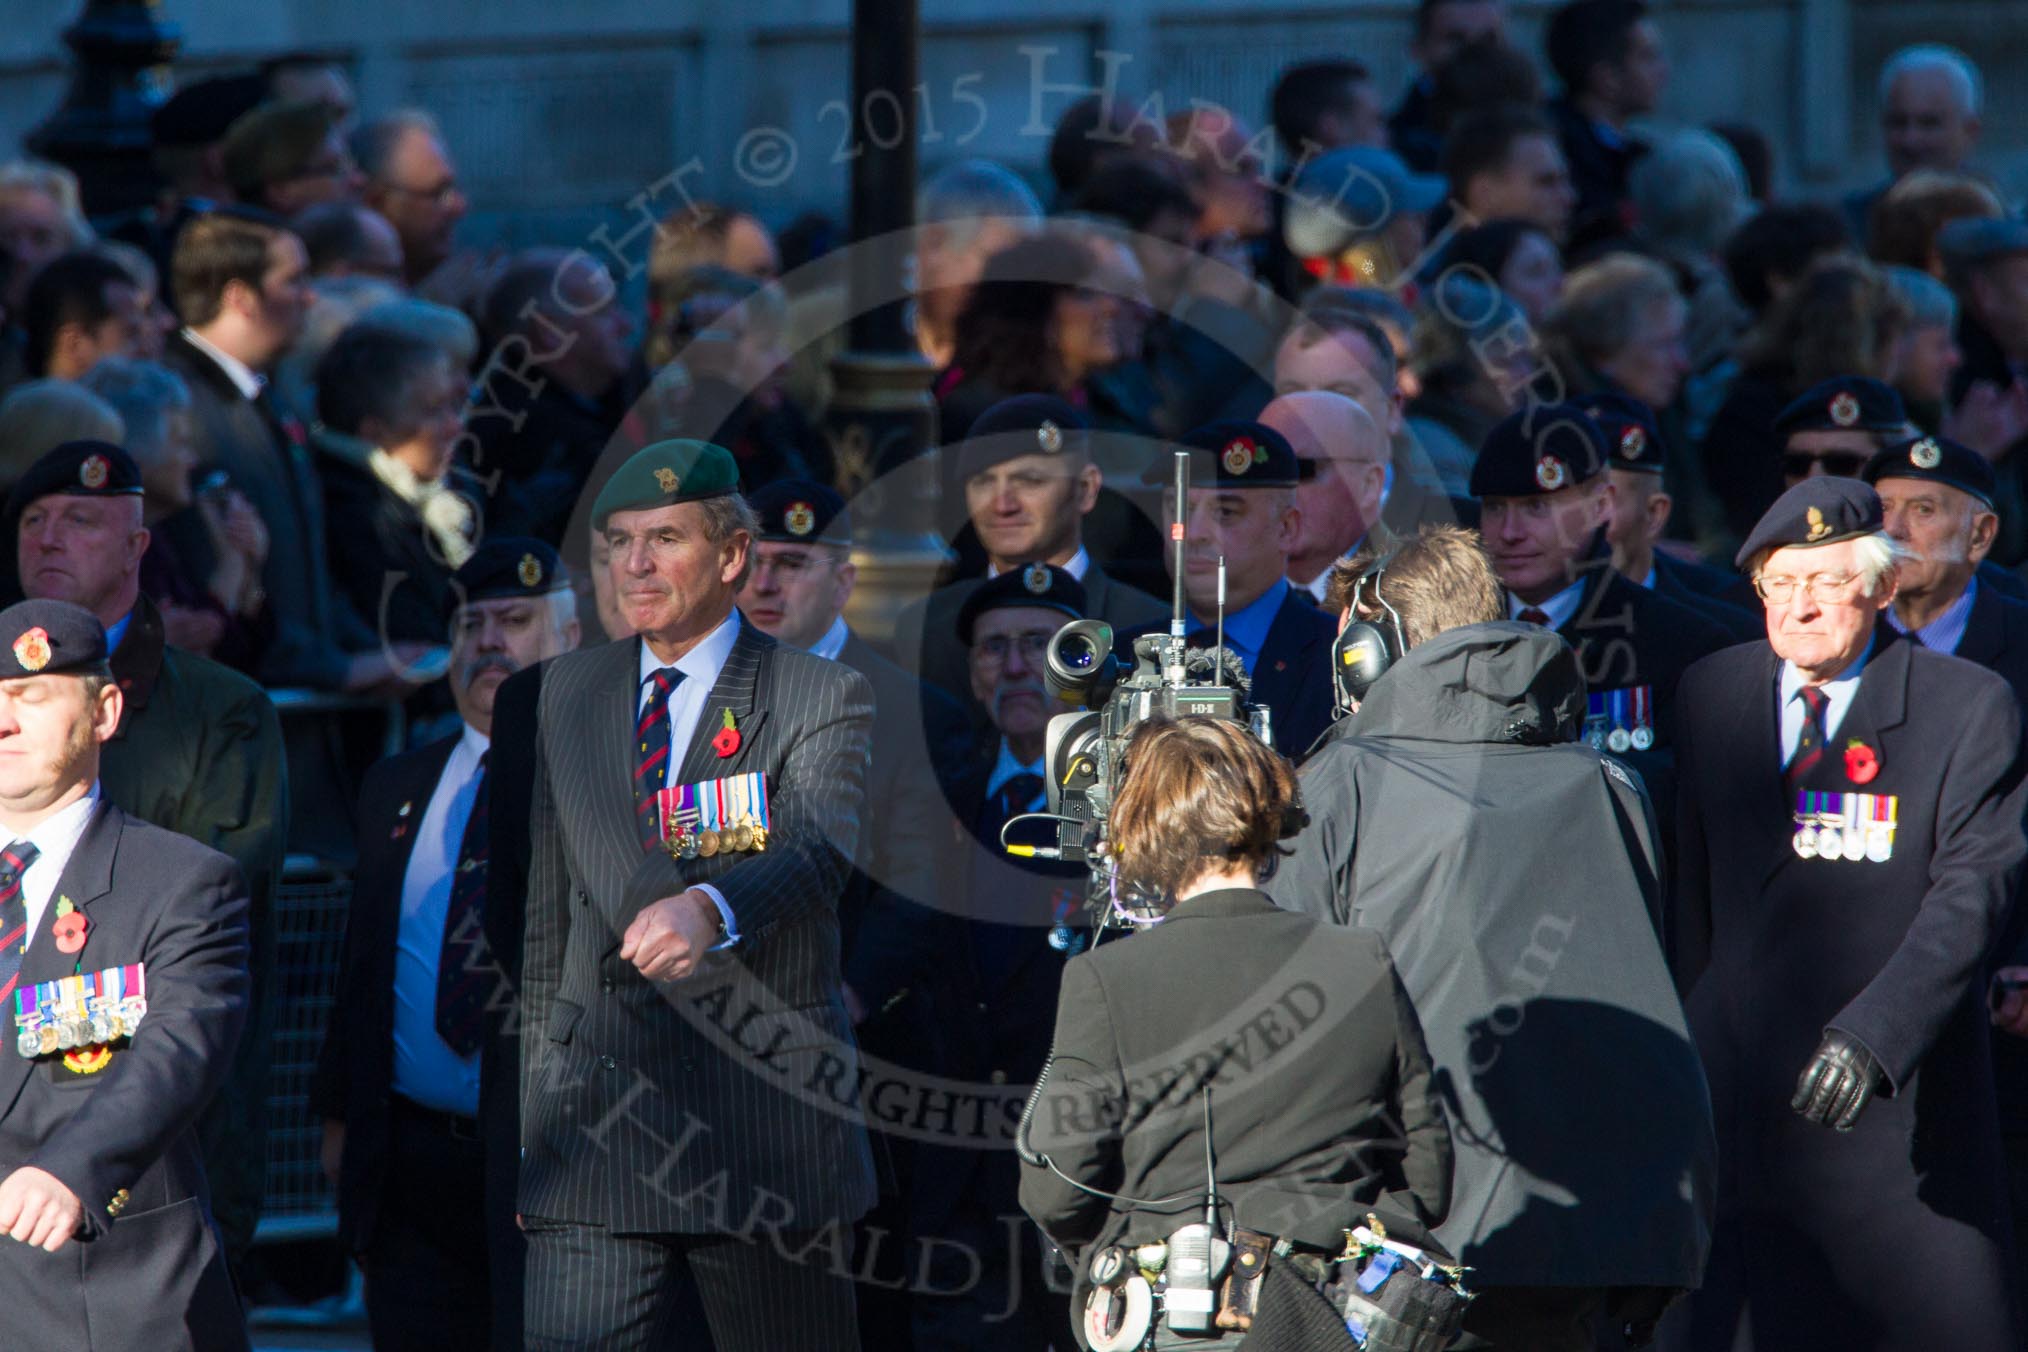 Remembrance Sunday Cenotaph March Past 2013: B21 - Royal Engineers Bomb Disposal Association..
Press stand opposite the Foreign Office building, Whitehall, London SW1,
London,
Greater London,
United Kingdom,
on 10 November 2013 at 12:02, image #1468